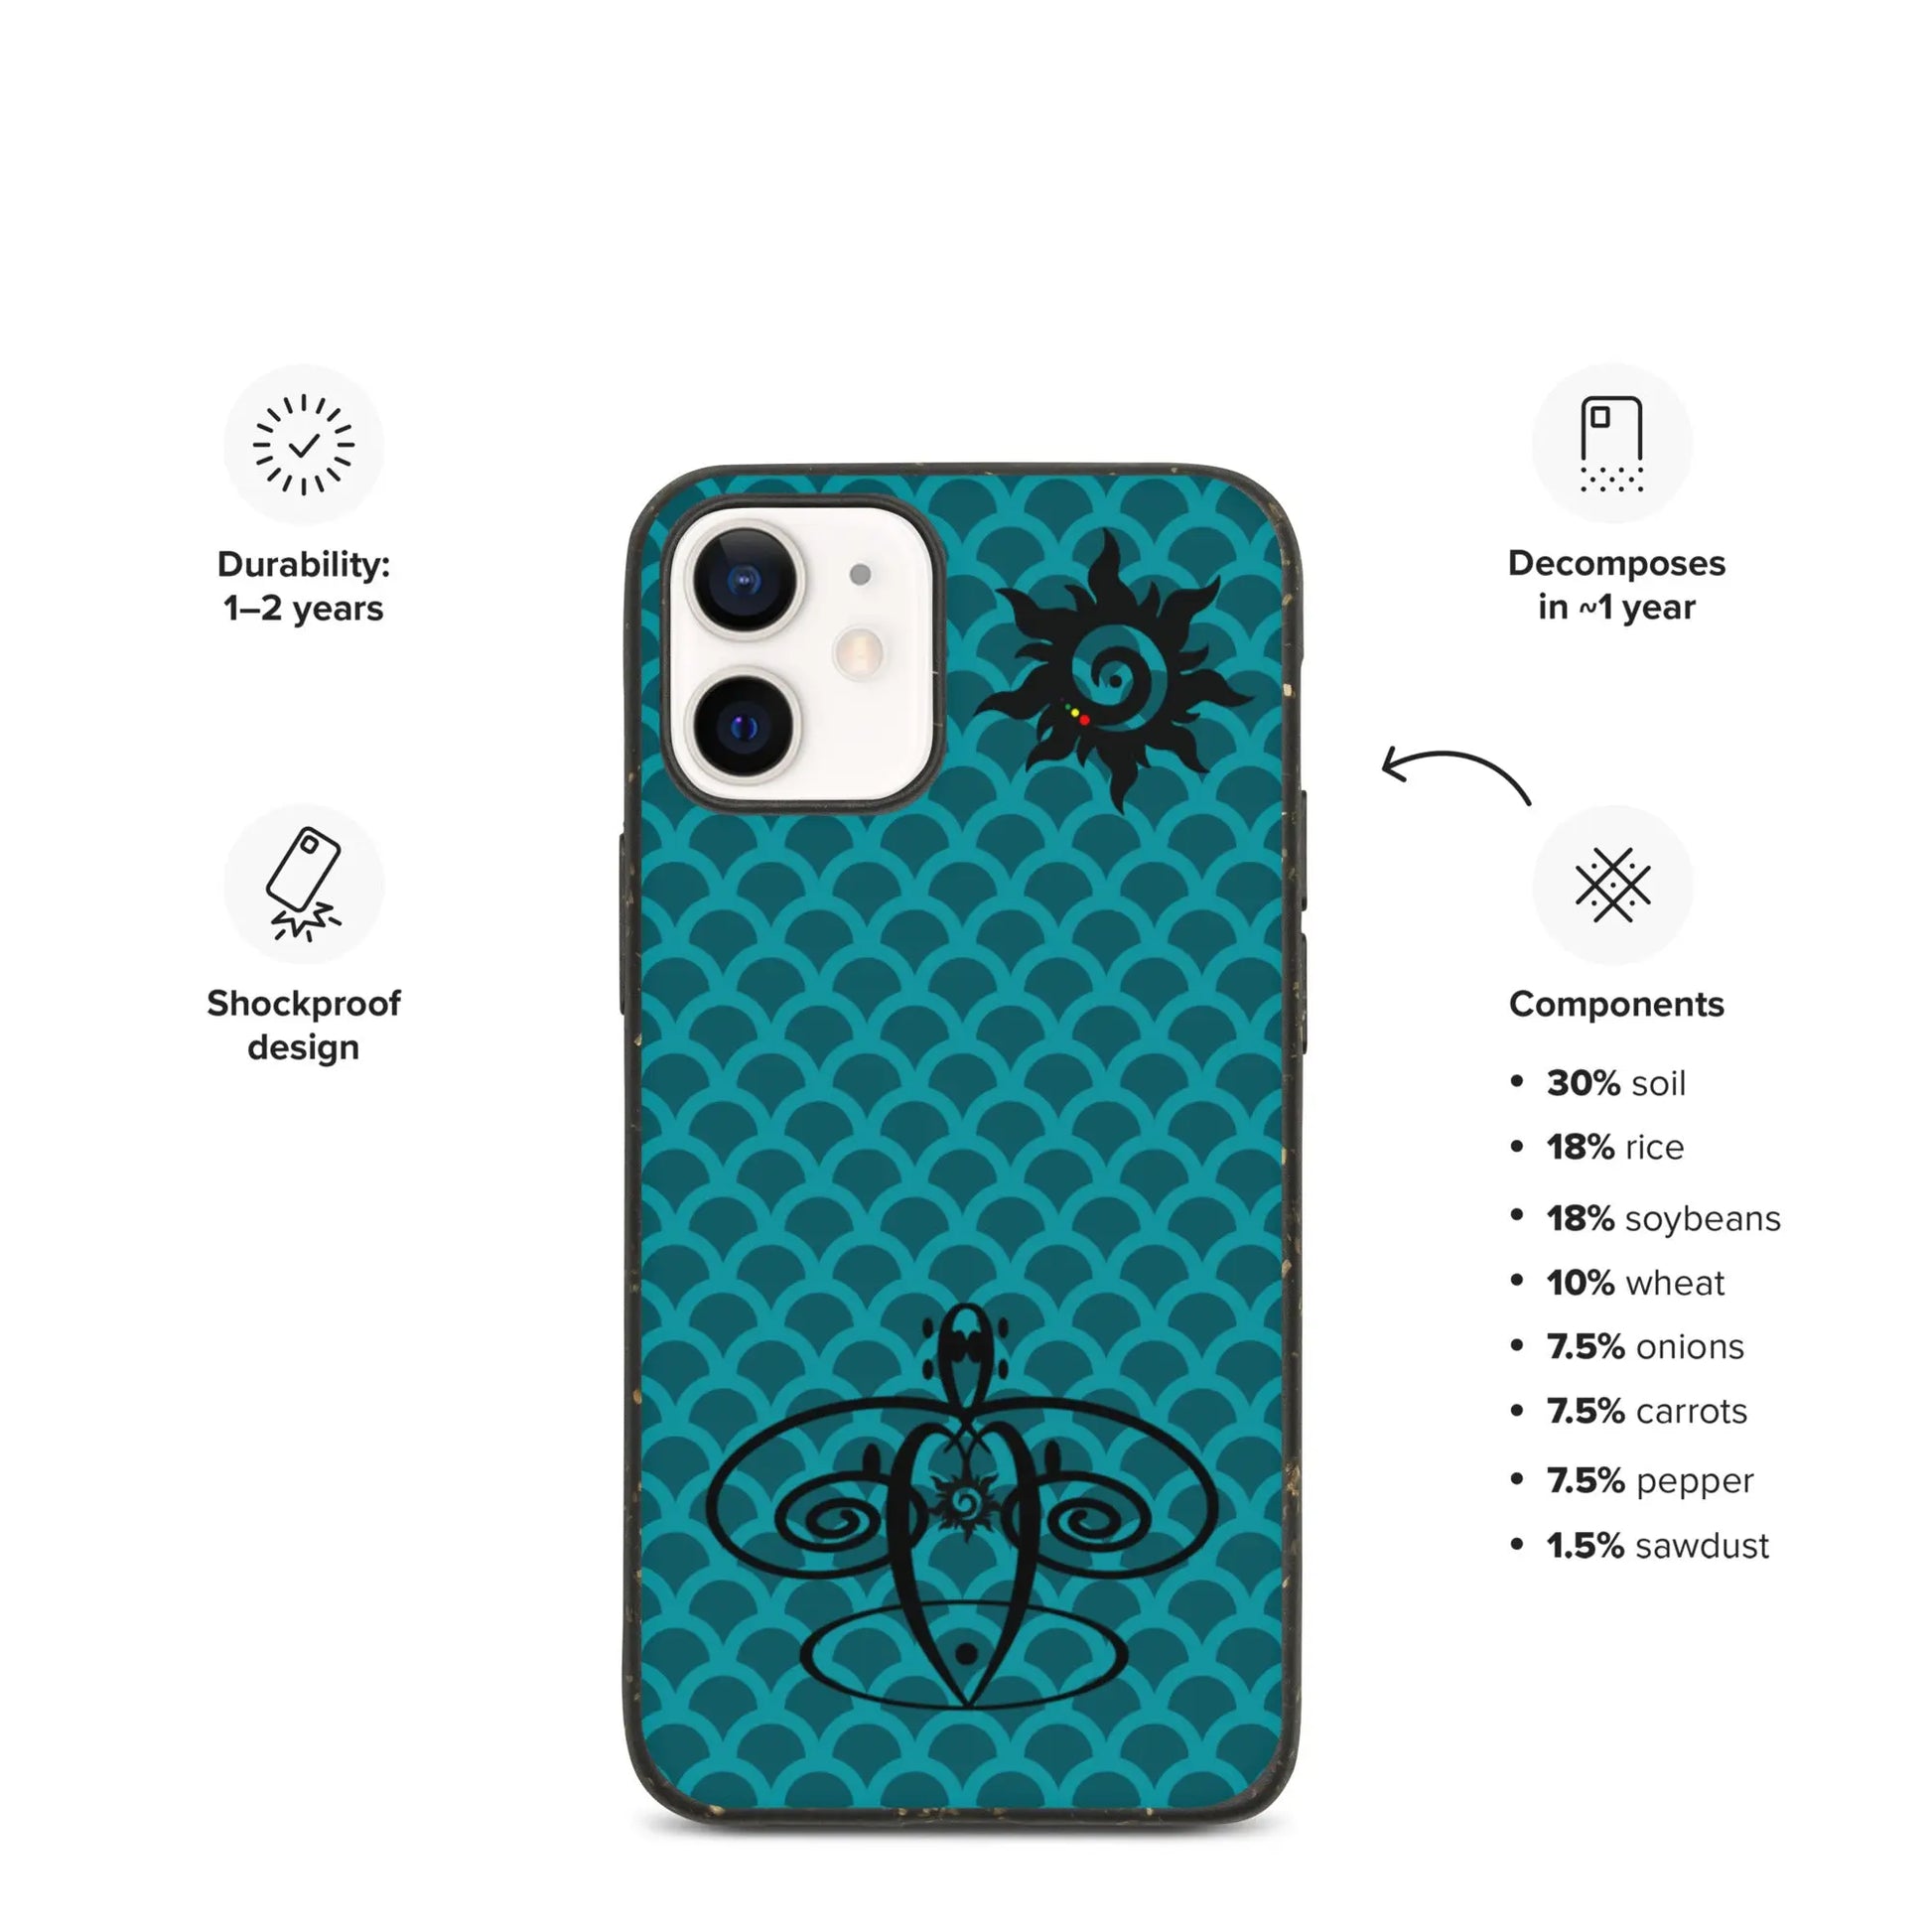 Speckled iPhone case / cellphone cases.